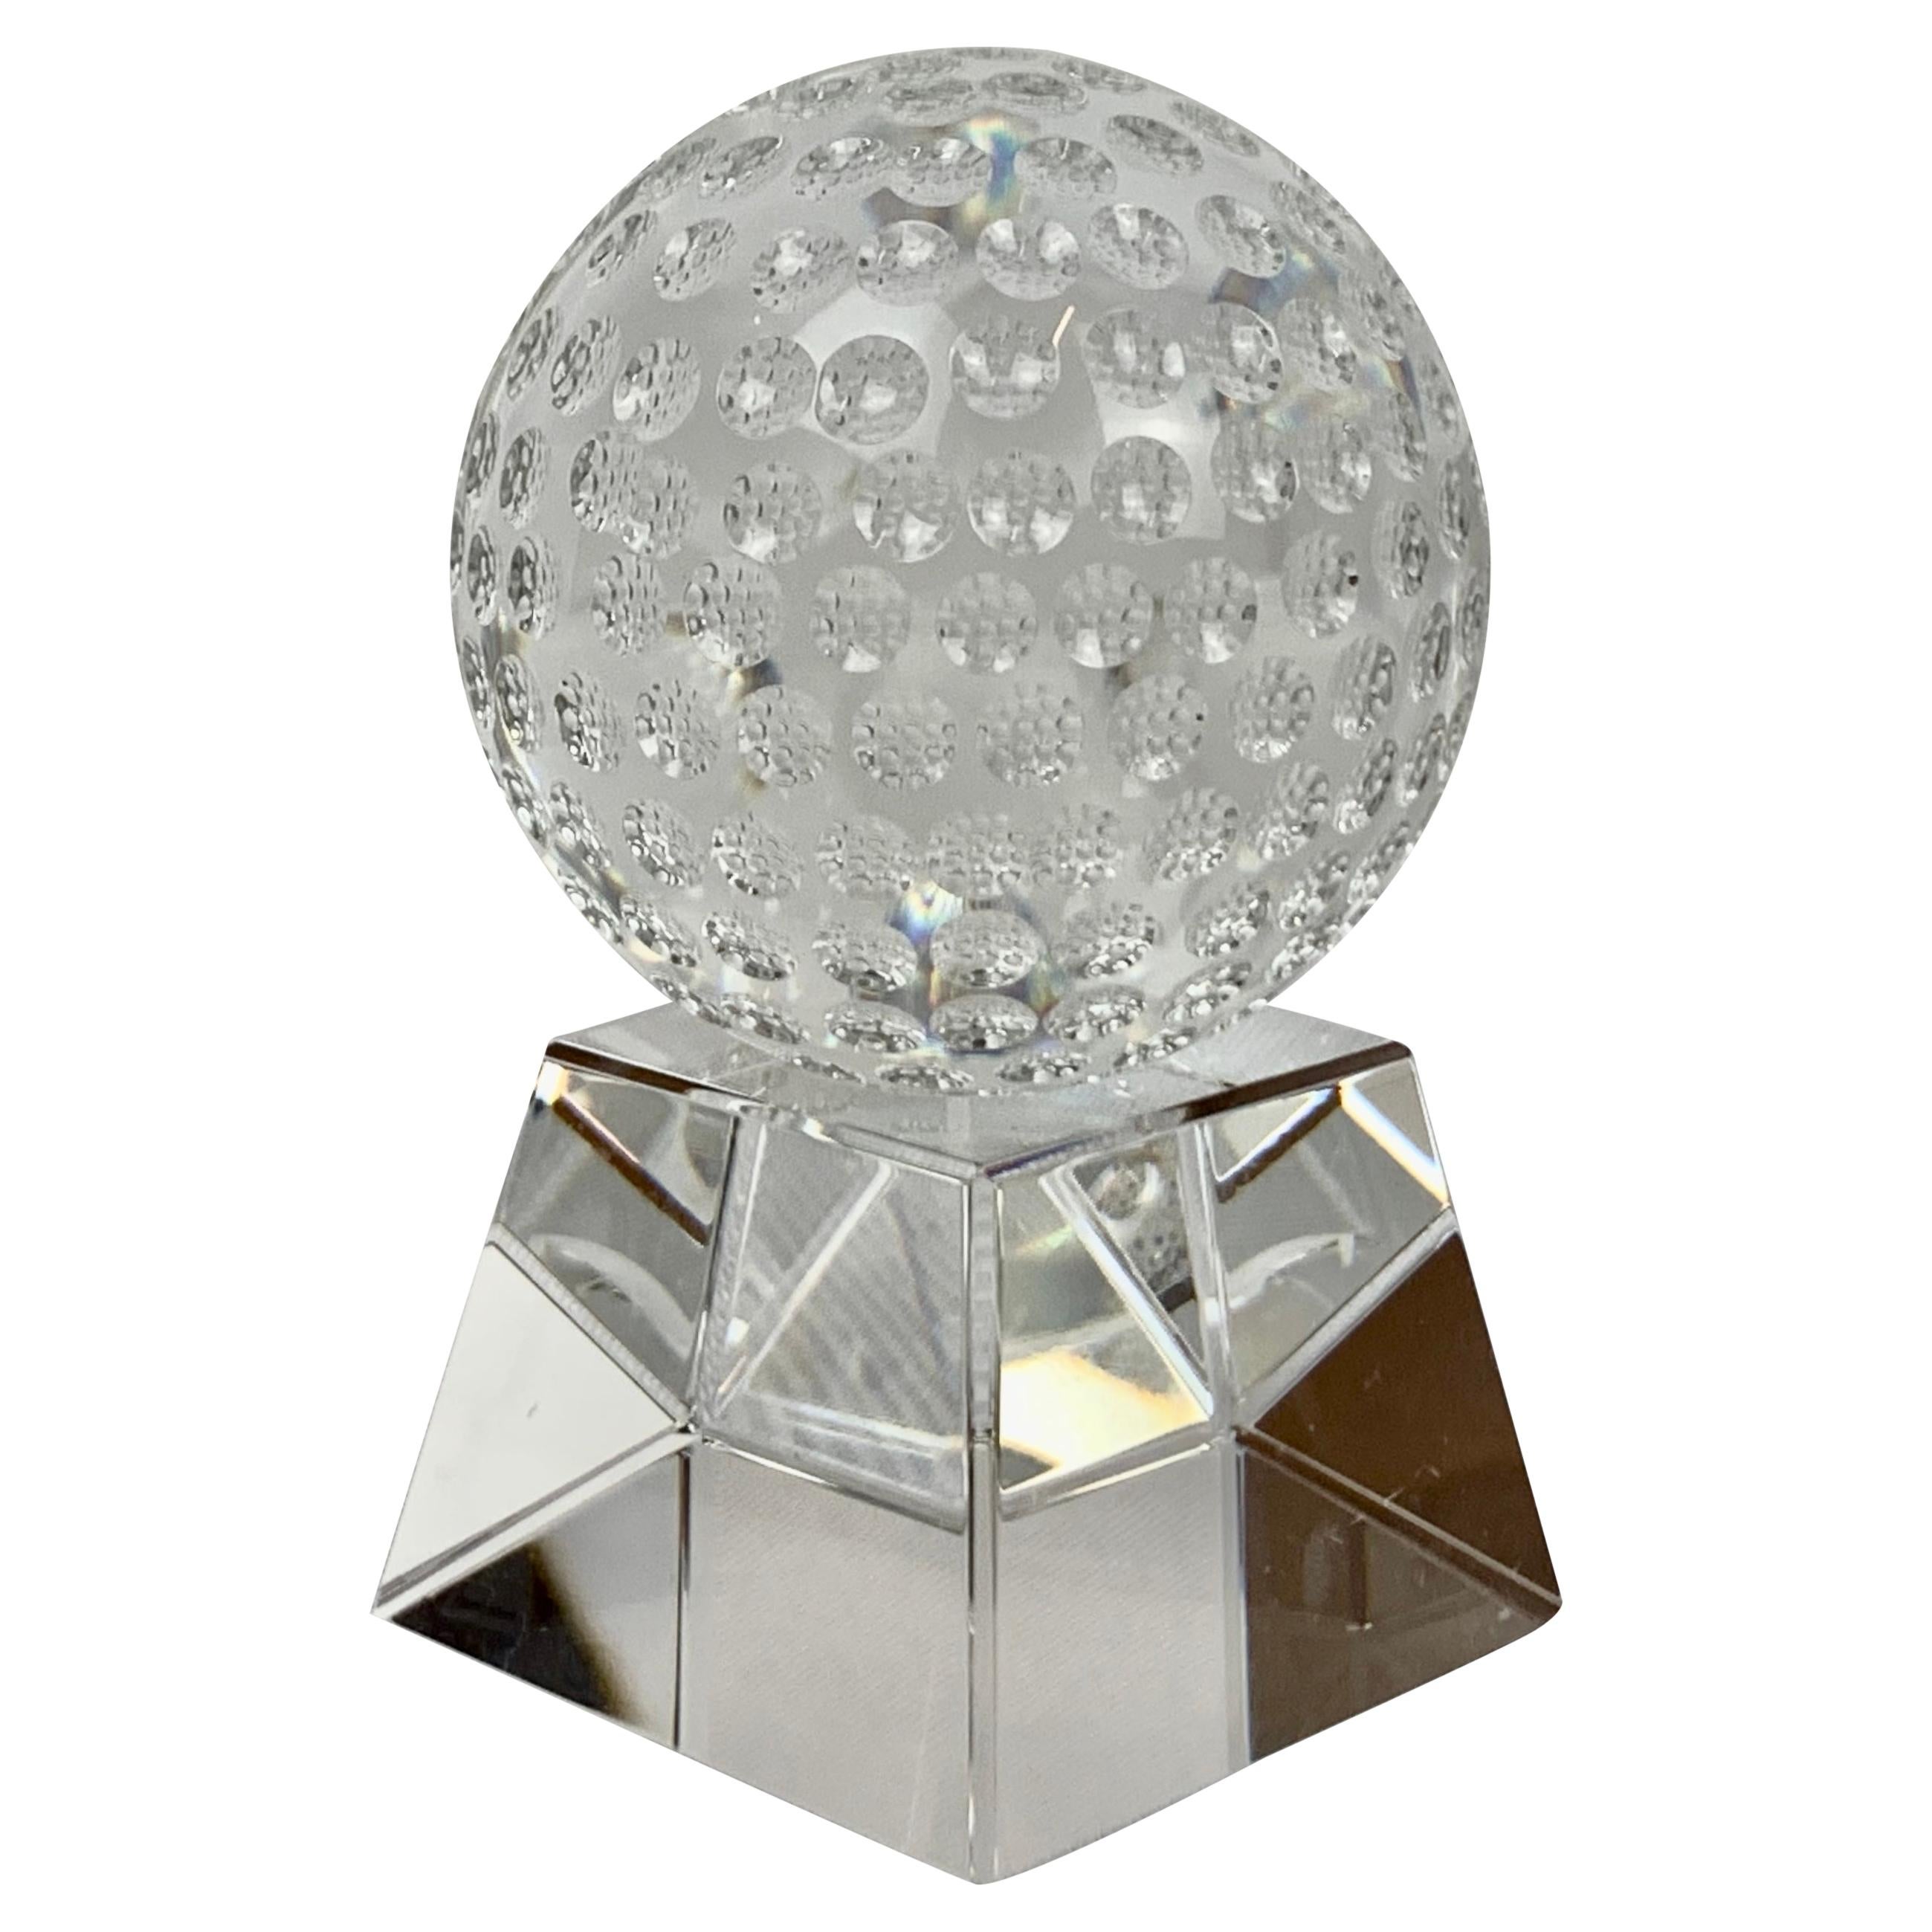 Waltz&F Crystal Small Cat Paperweight Galss Globe Hemisphere Home Office Table Decoration 